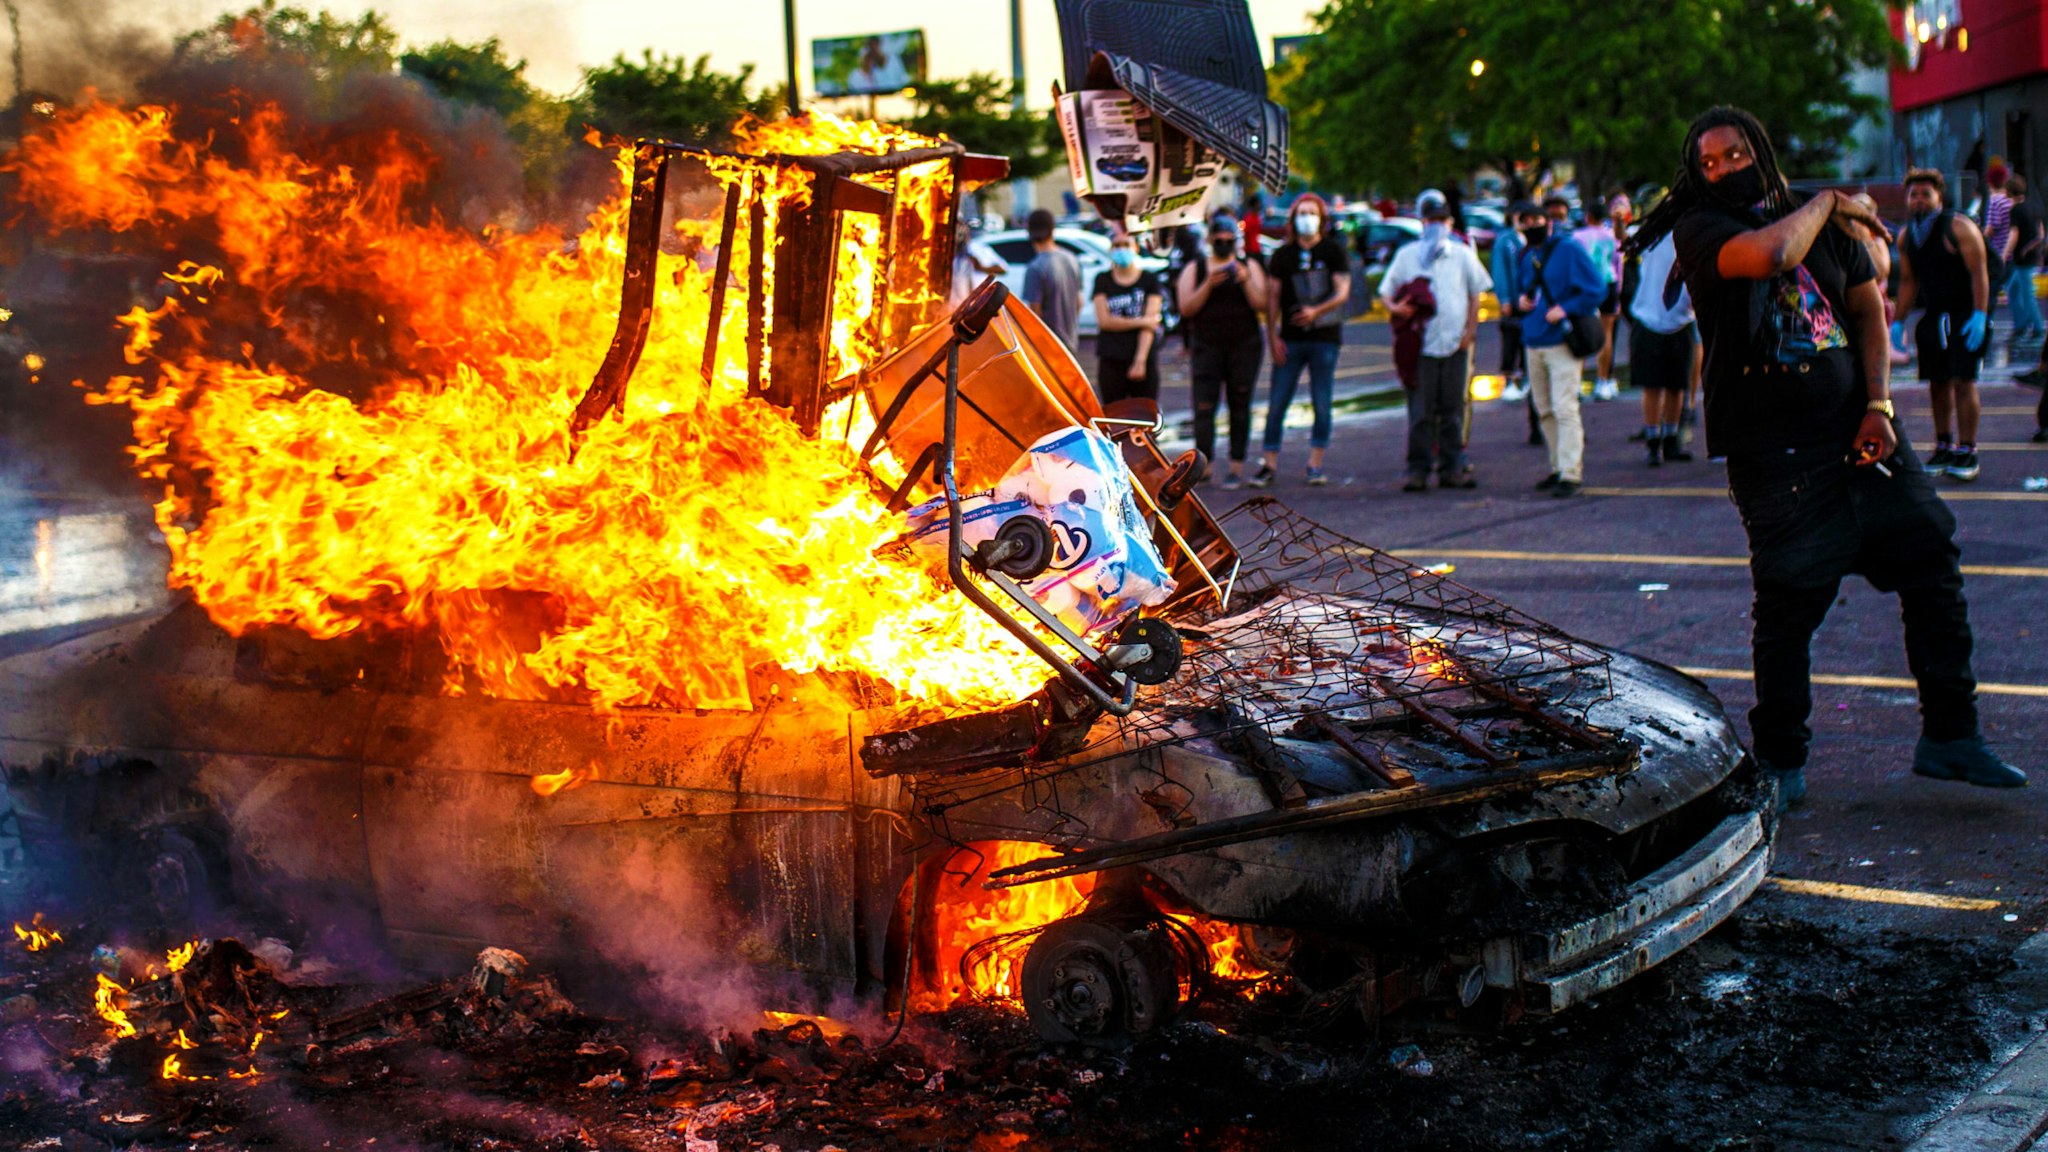 Protesters throw objects into a fire outside a Target store near the Third Police Precinct on May 28, 2020 in Minneapolis, Minnesota, during a demonstration over the death of George Floyd. - A police precinct in Minnesota went up in flames late on May 28 in a third day of demonstrations as the so-called Twin Cities of Minneapolis and St. Paul seethed over the shocking police killing of Floyd. The precinct, which police had abandoned, burned after a group of protesters pushed through barriers around the building, breaking windows and chanting slogans. A much larger crowd demonstrated as the building went up in flames.